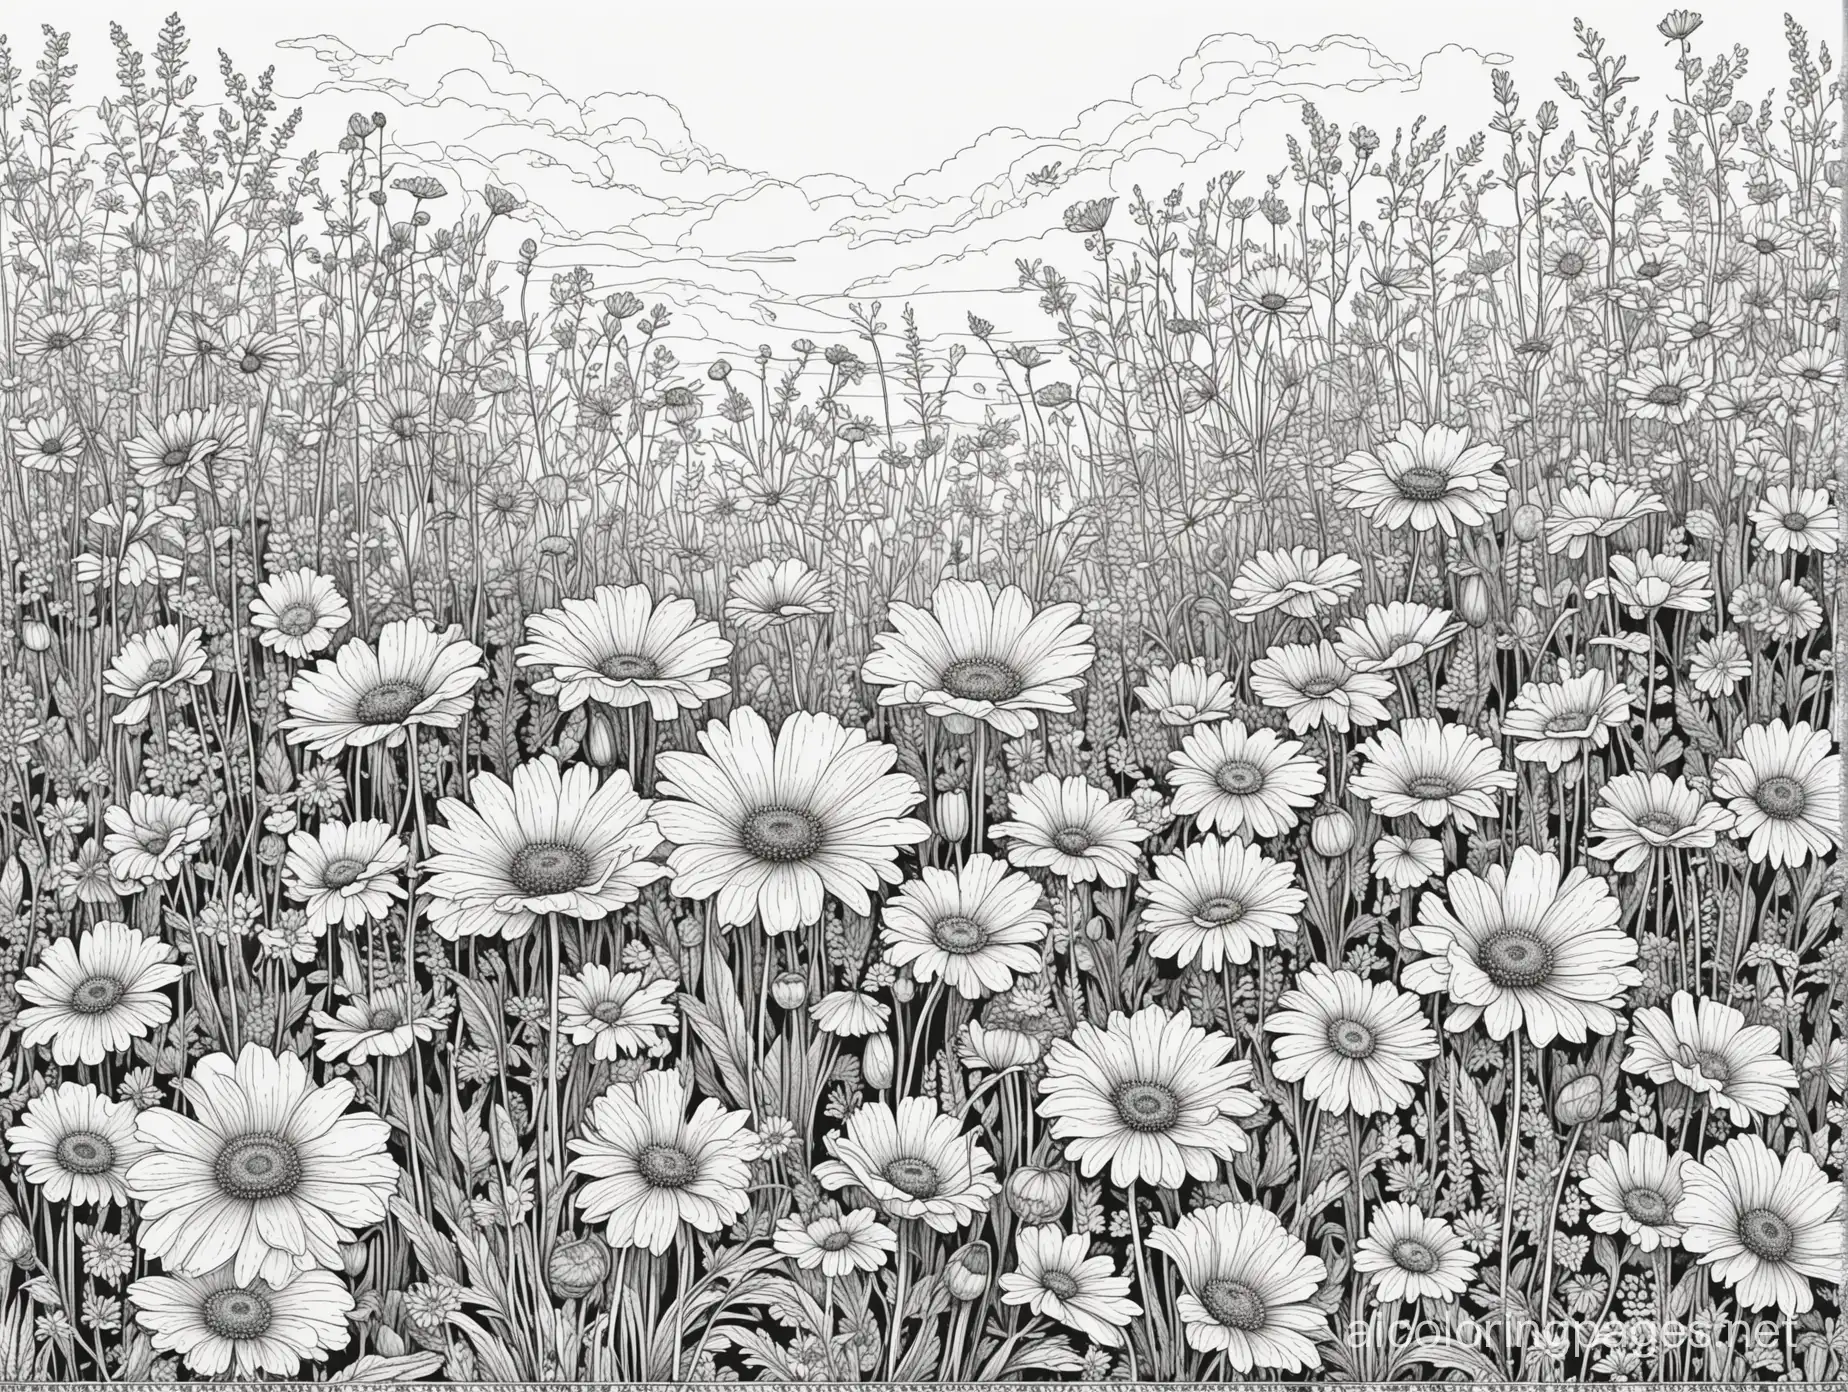 Create a picture for adult colouring in black and white only.  The theme of the picture: British garden. gardening. Style: sketching, ink, line drawings. the picture shows a flower bed with daisies and poppies The detail of the picture is medium. Ratio 11:8.5 , Coloring Page, black and white, line art, white background, Simplicity, Ample White Space. The background of the coloring page is plain white to make it easy for young children to color within the lines. The outlines of all the subjects are easy to distinguish, making it simple for kids to color without too much difficulty